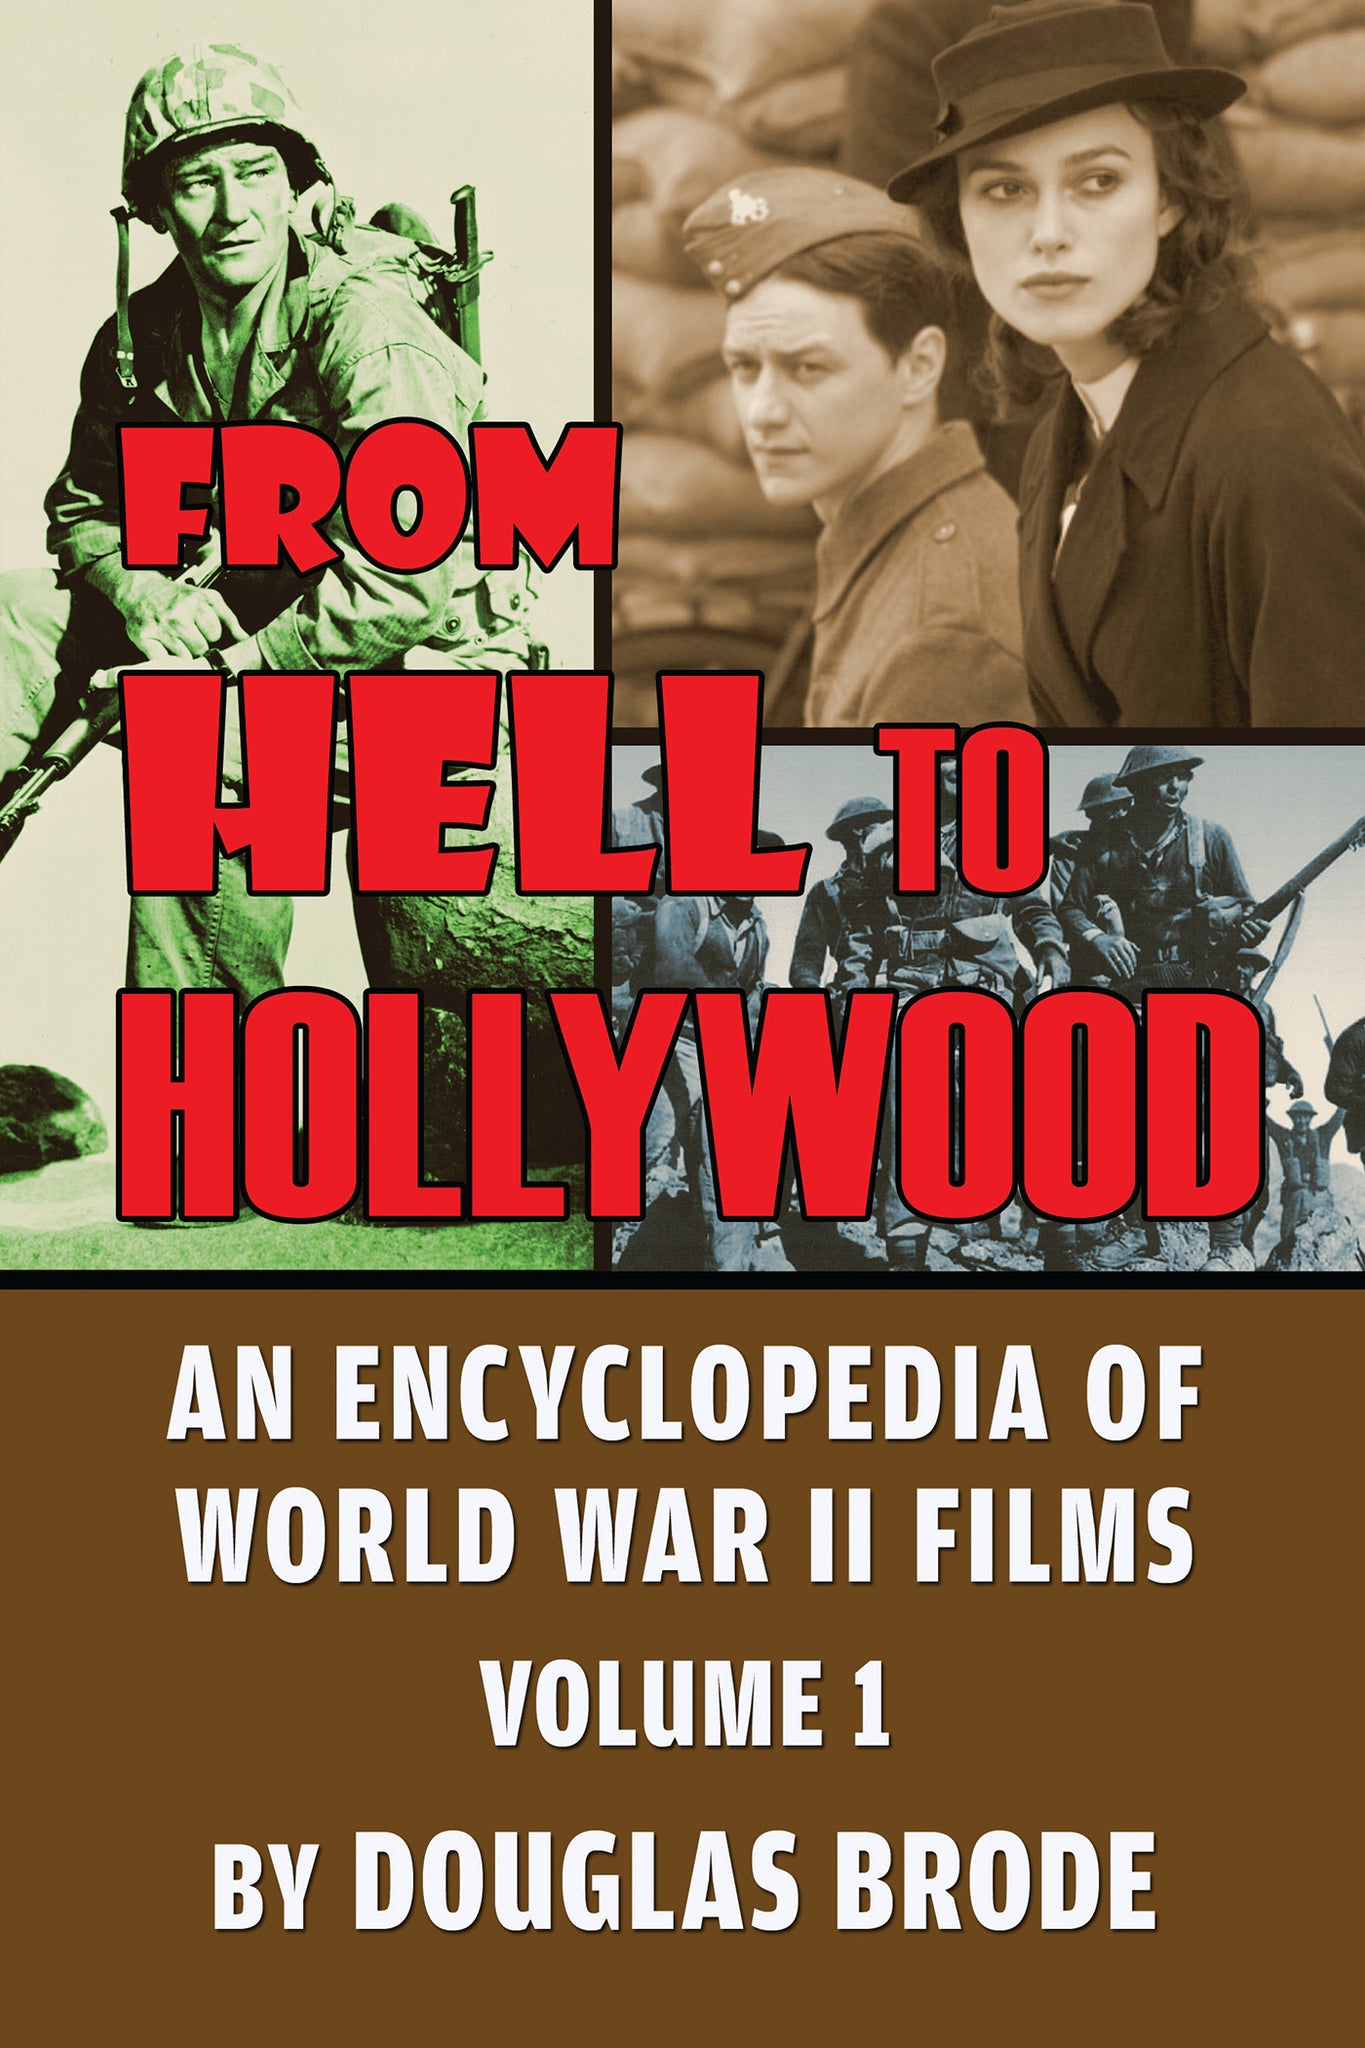 From Hell To Hollywood: An Encyclopedia of World War II Films Volume 1 (ebook) - BearManor Manor